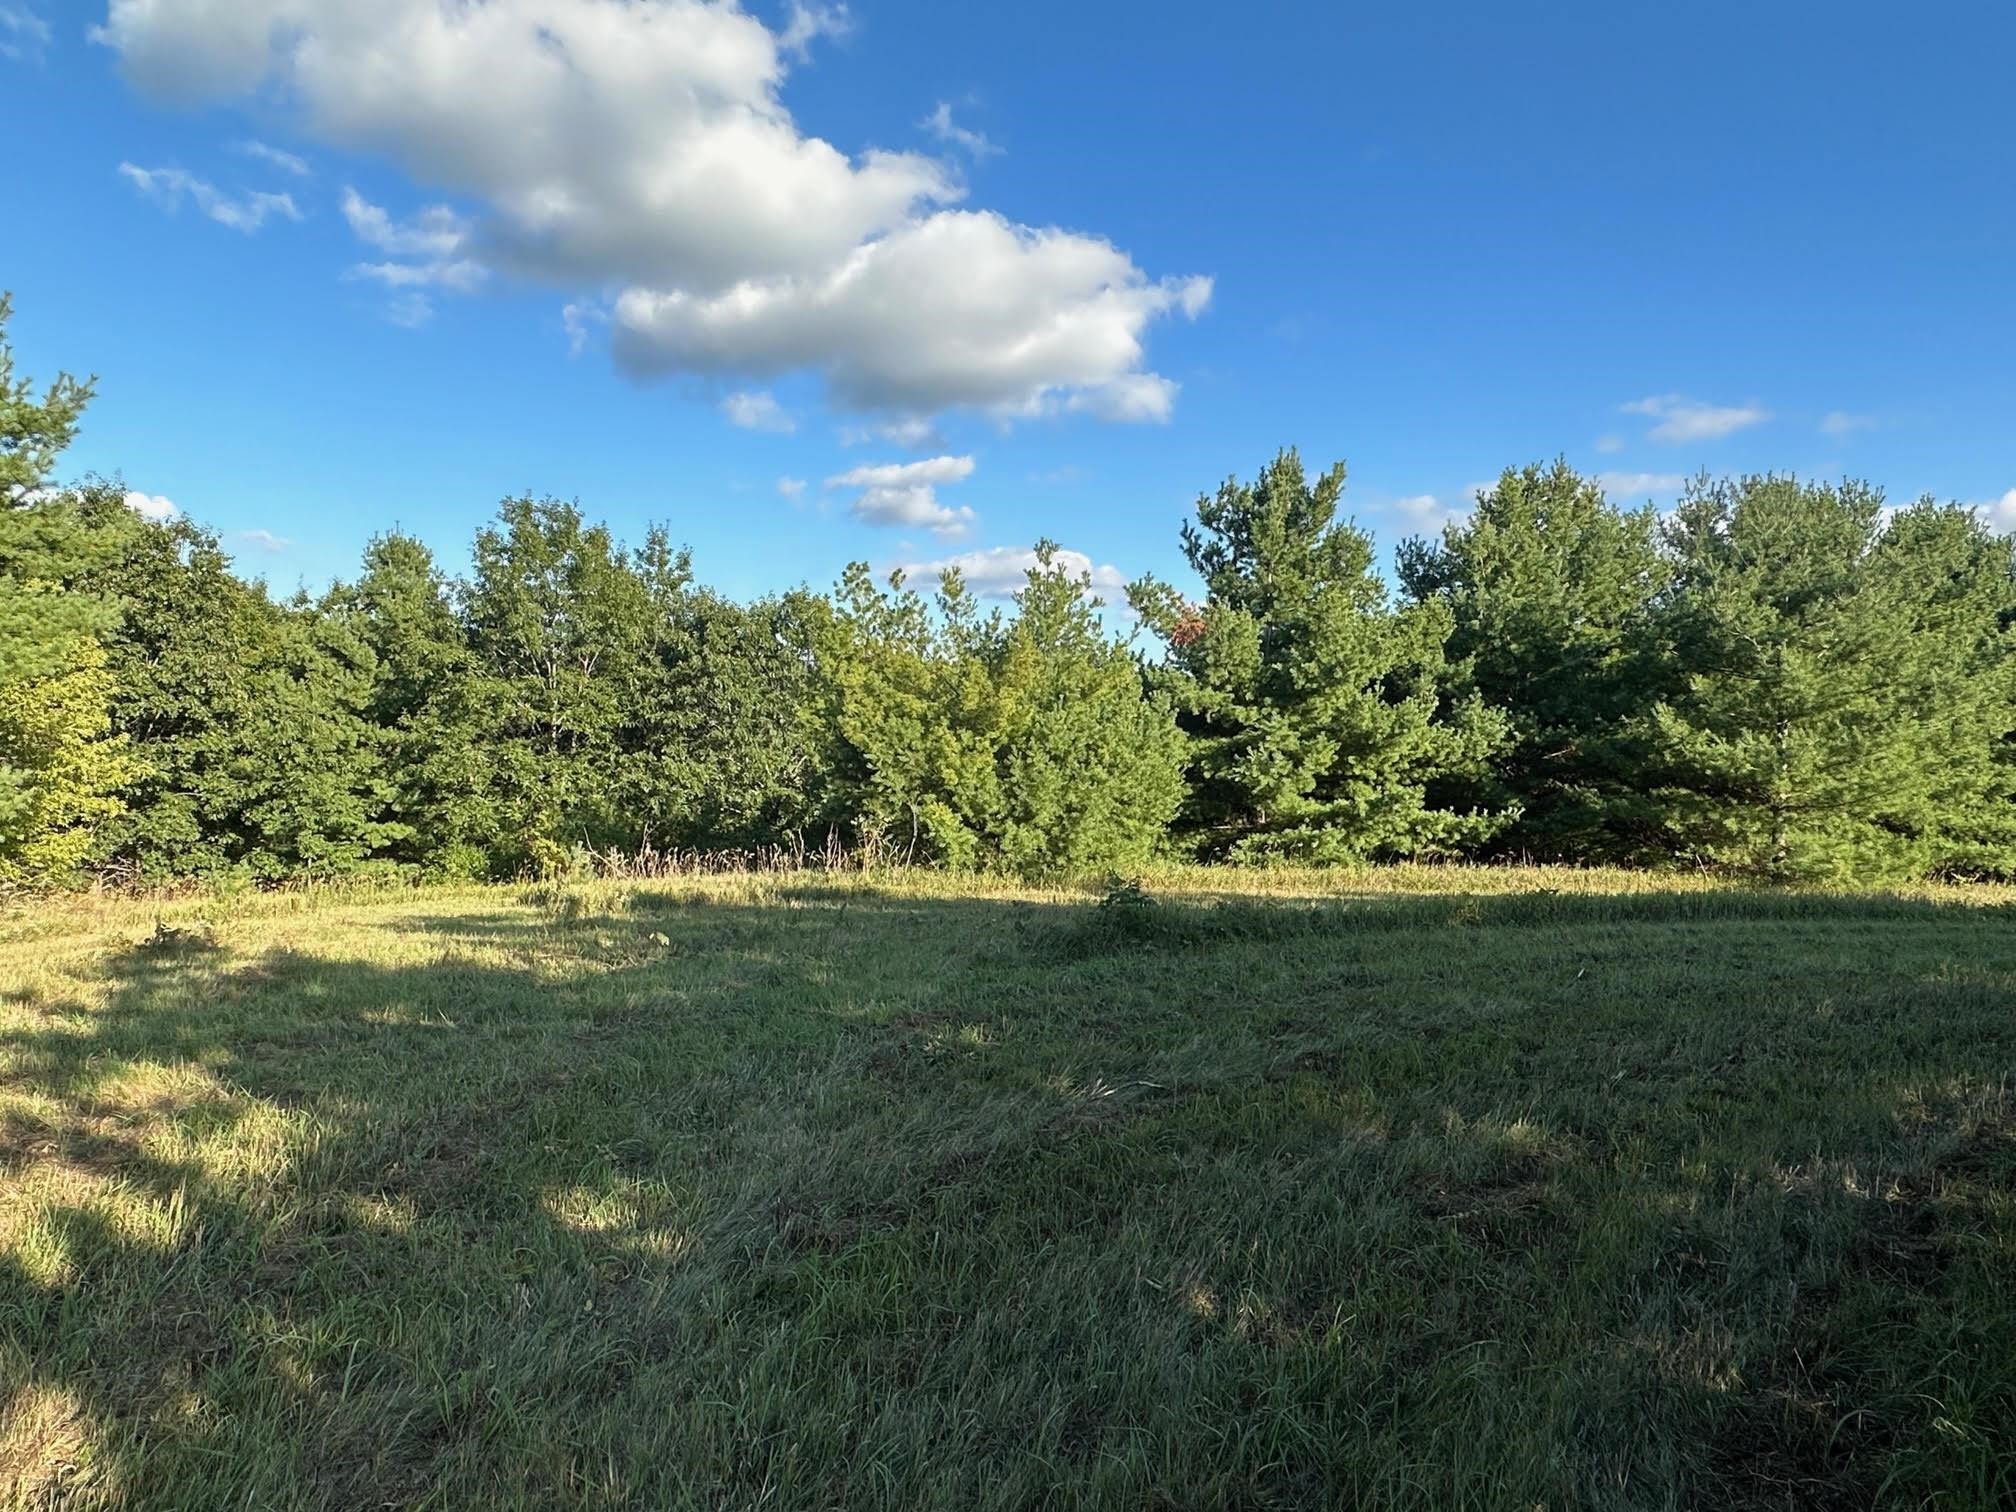 Bring your own builder to this private and wooded 1.99 acre lot at the end of a cul de sac.  The rolling hills and quiet of the Driftless region are on beautiful display on this picturesque lot.  Walk down the hill into Mount Vernon, or drive 10 minutes to Verona/Epic, or 20 minutes to downtown Madison.  The gentle slope of the lot allows for significant lower level exposure.